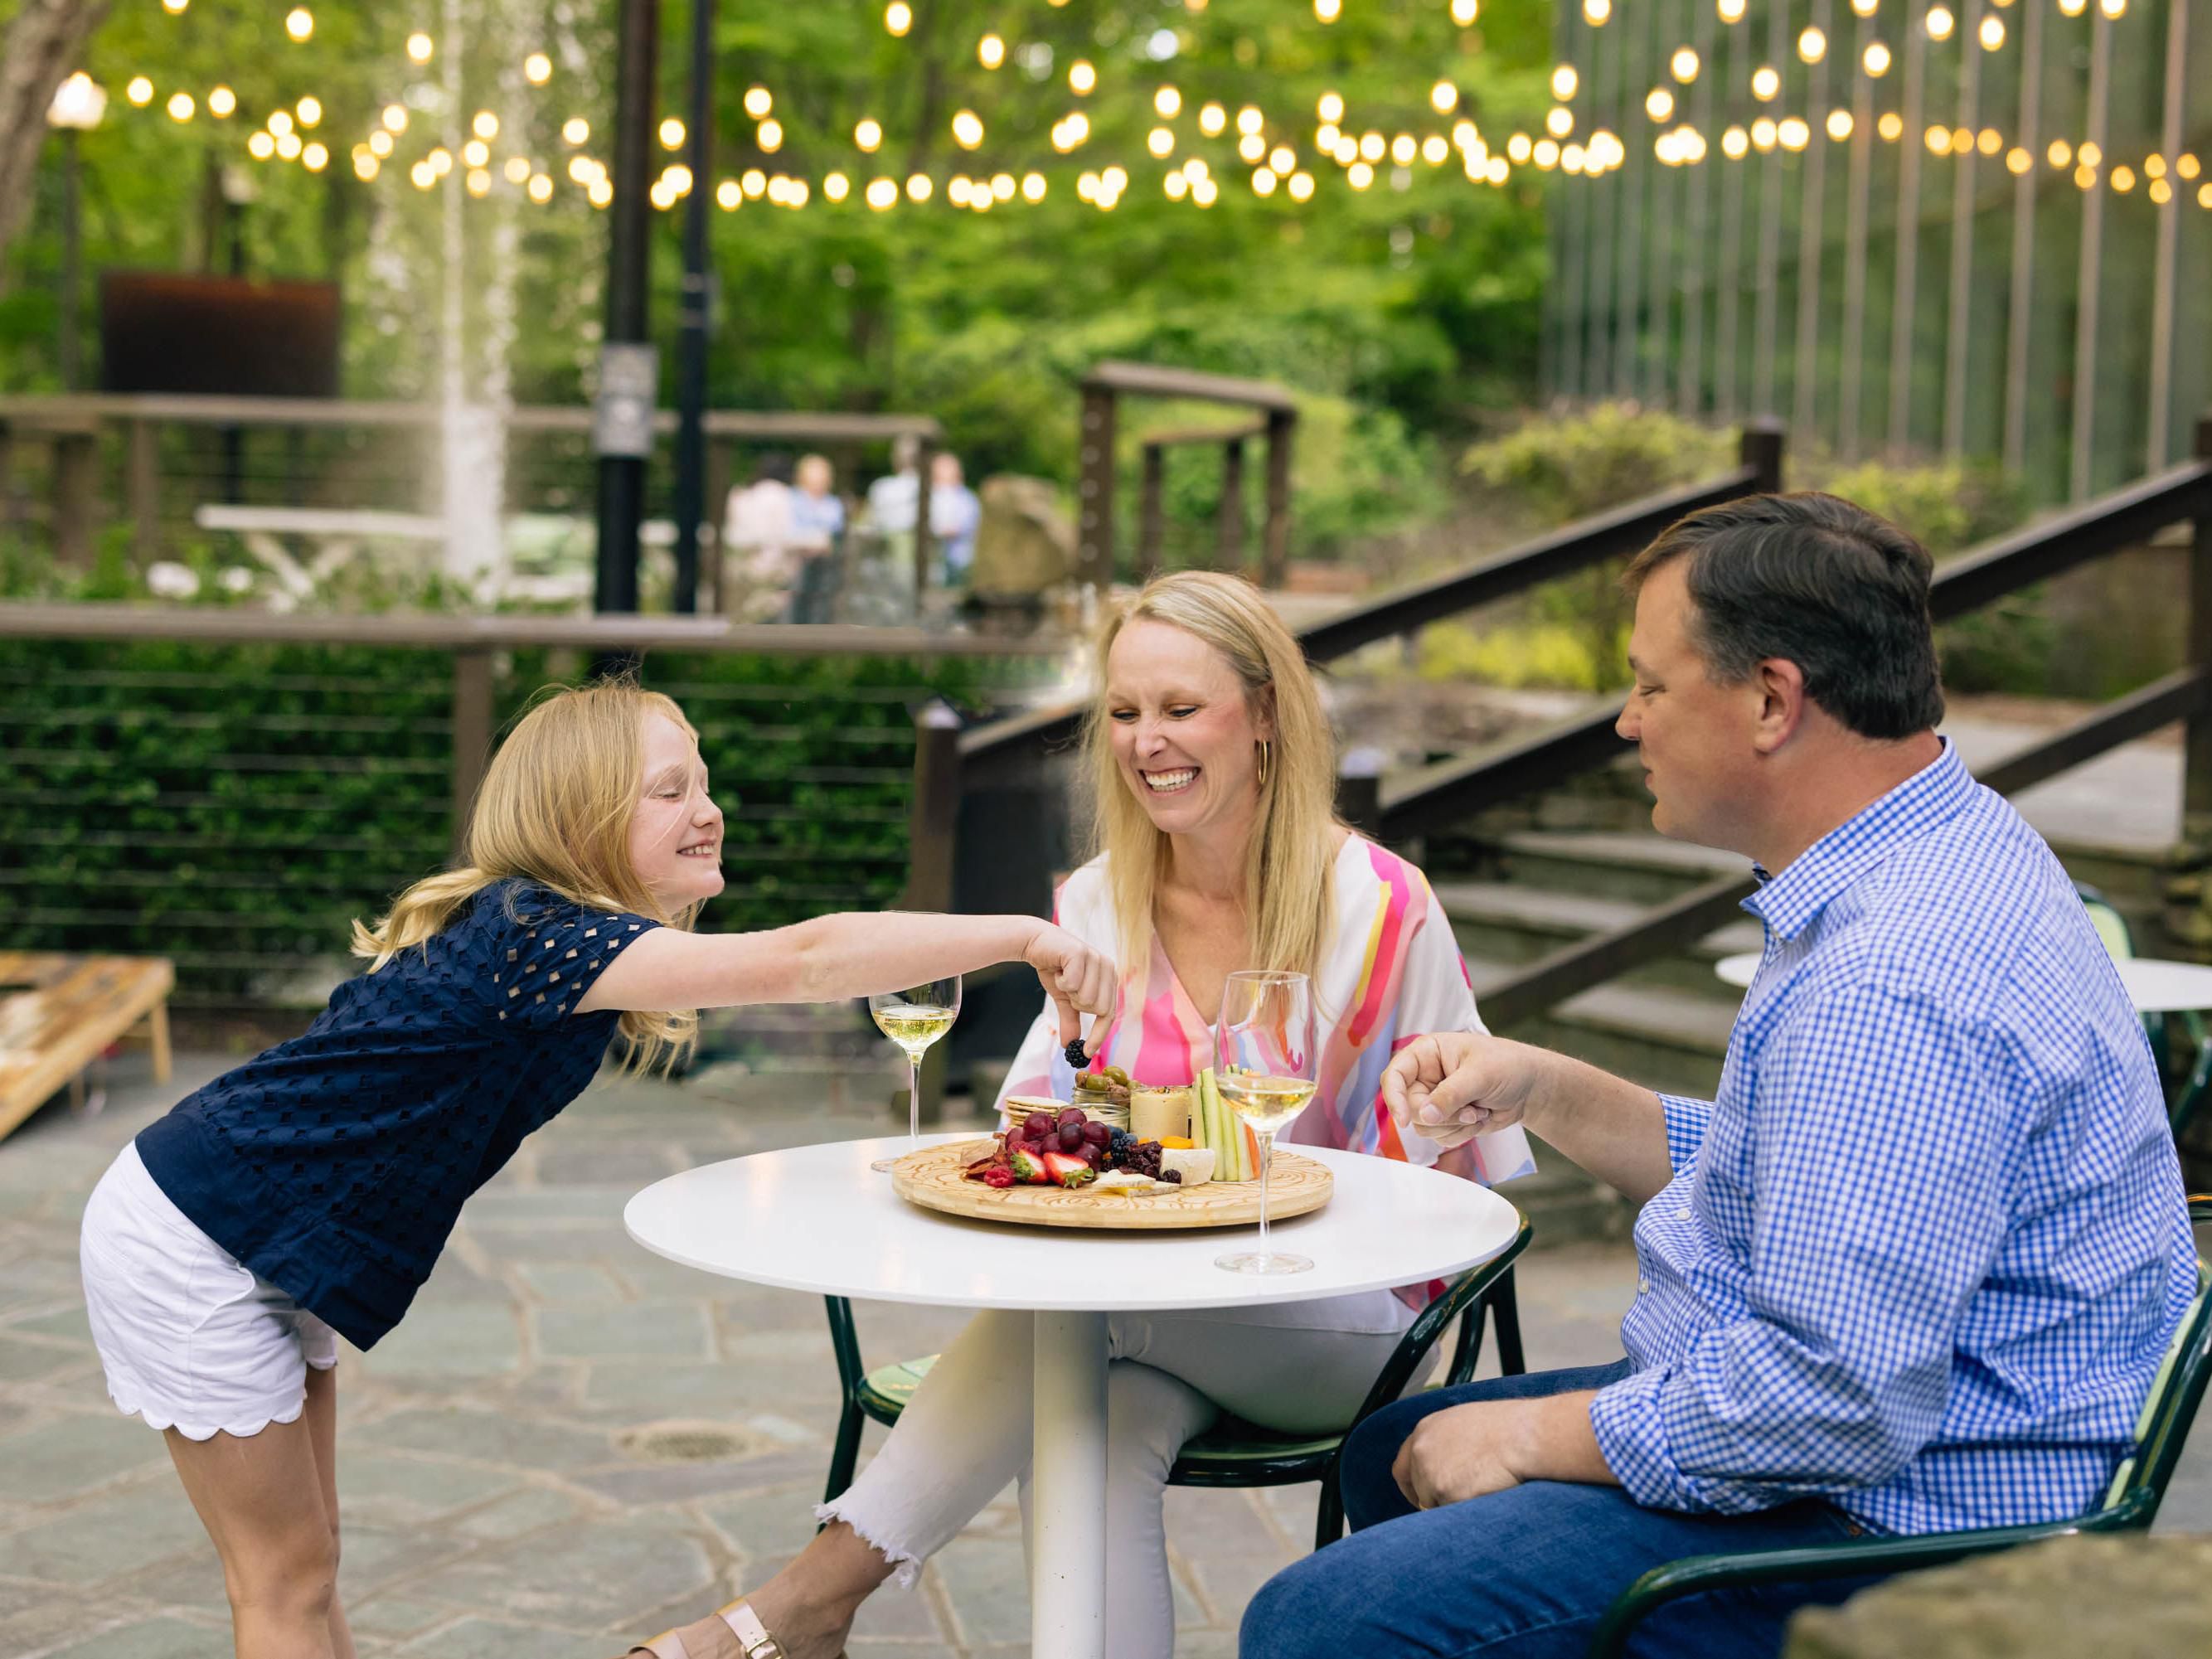 Our backyard was made for family fun. Take a stroll through our forested nature trails. Relax with a refreshing drink and a bite to eat or engage in games on our patio. Beat the Georgia heat and escape the hustle of the city right in our scenic sanctuary.